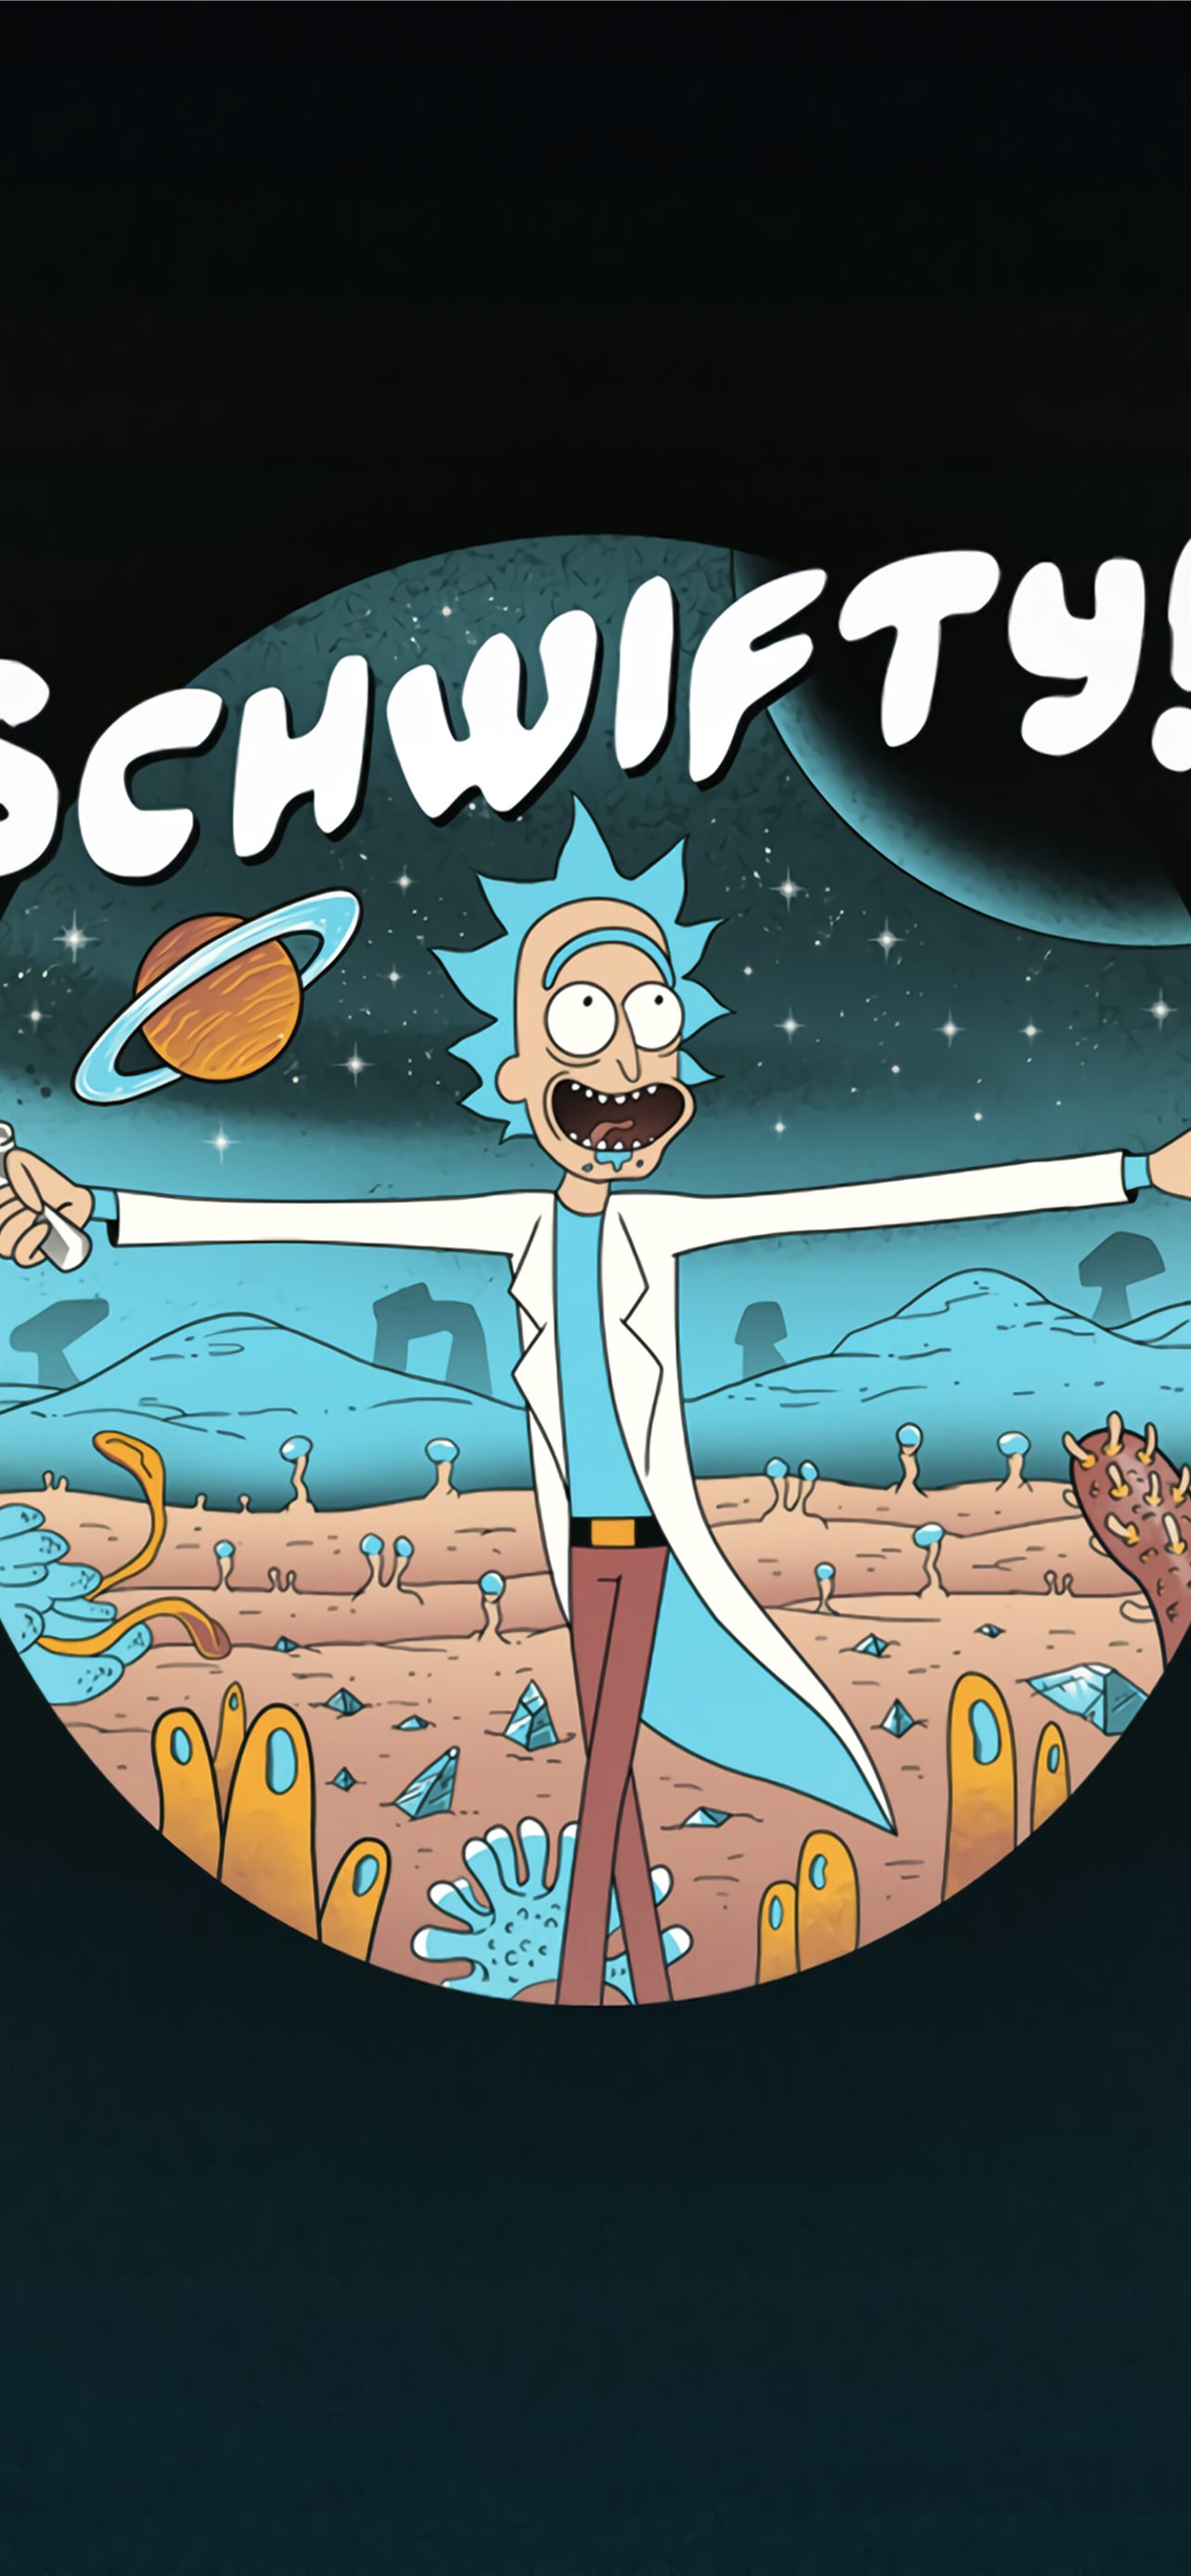 600+] Rick And Morty Wallpapers | Wallpapers.com